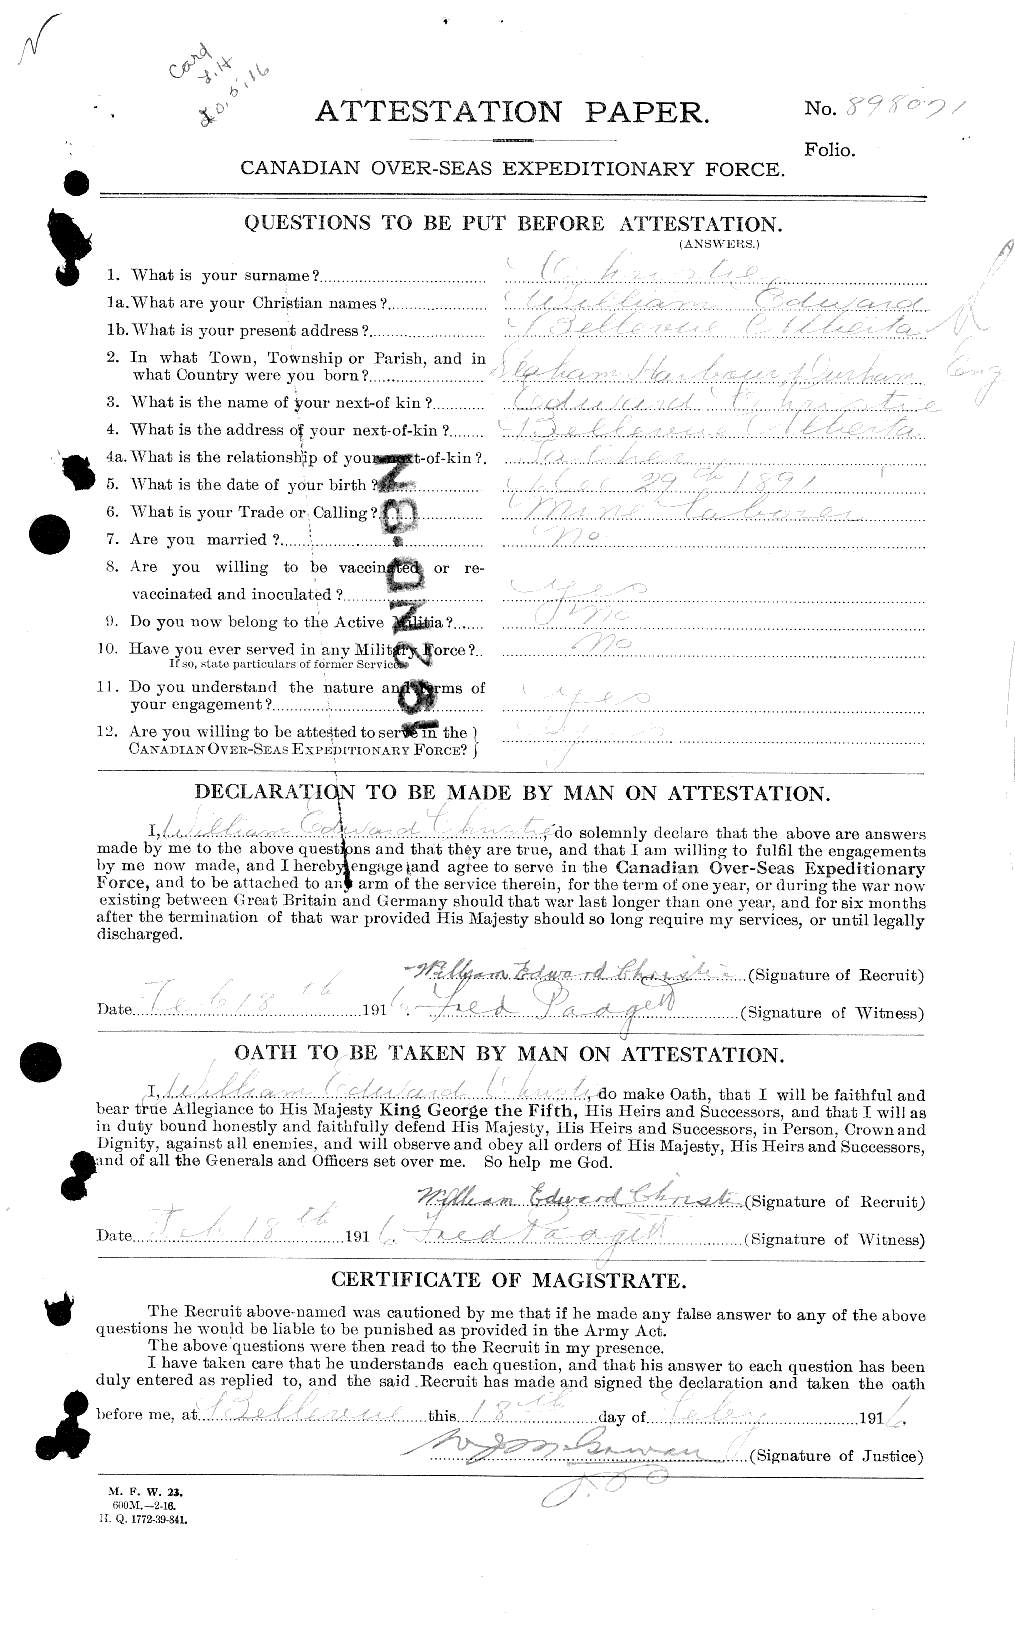 Personnel Records of the First World War - CEF 022092a